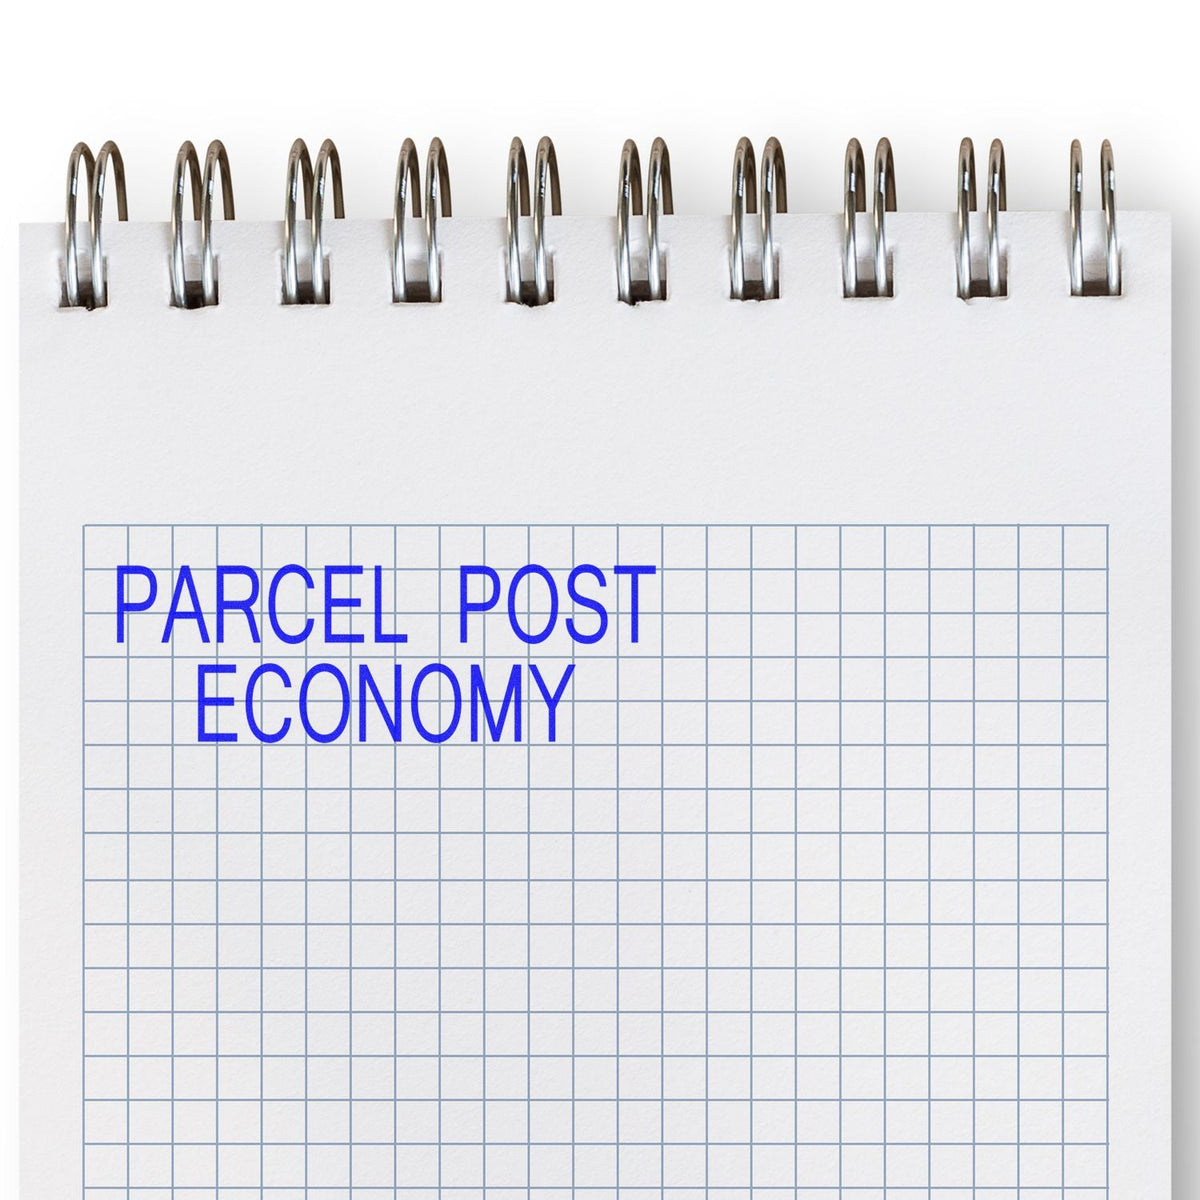 Self-Inking Parcel Post Economy Stamp In Use Photo